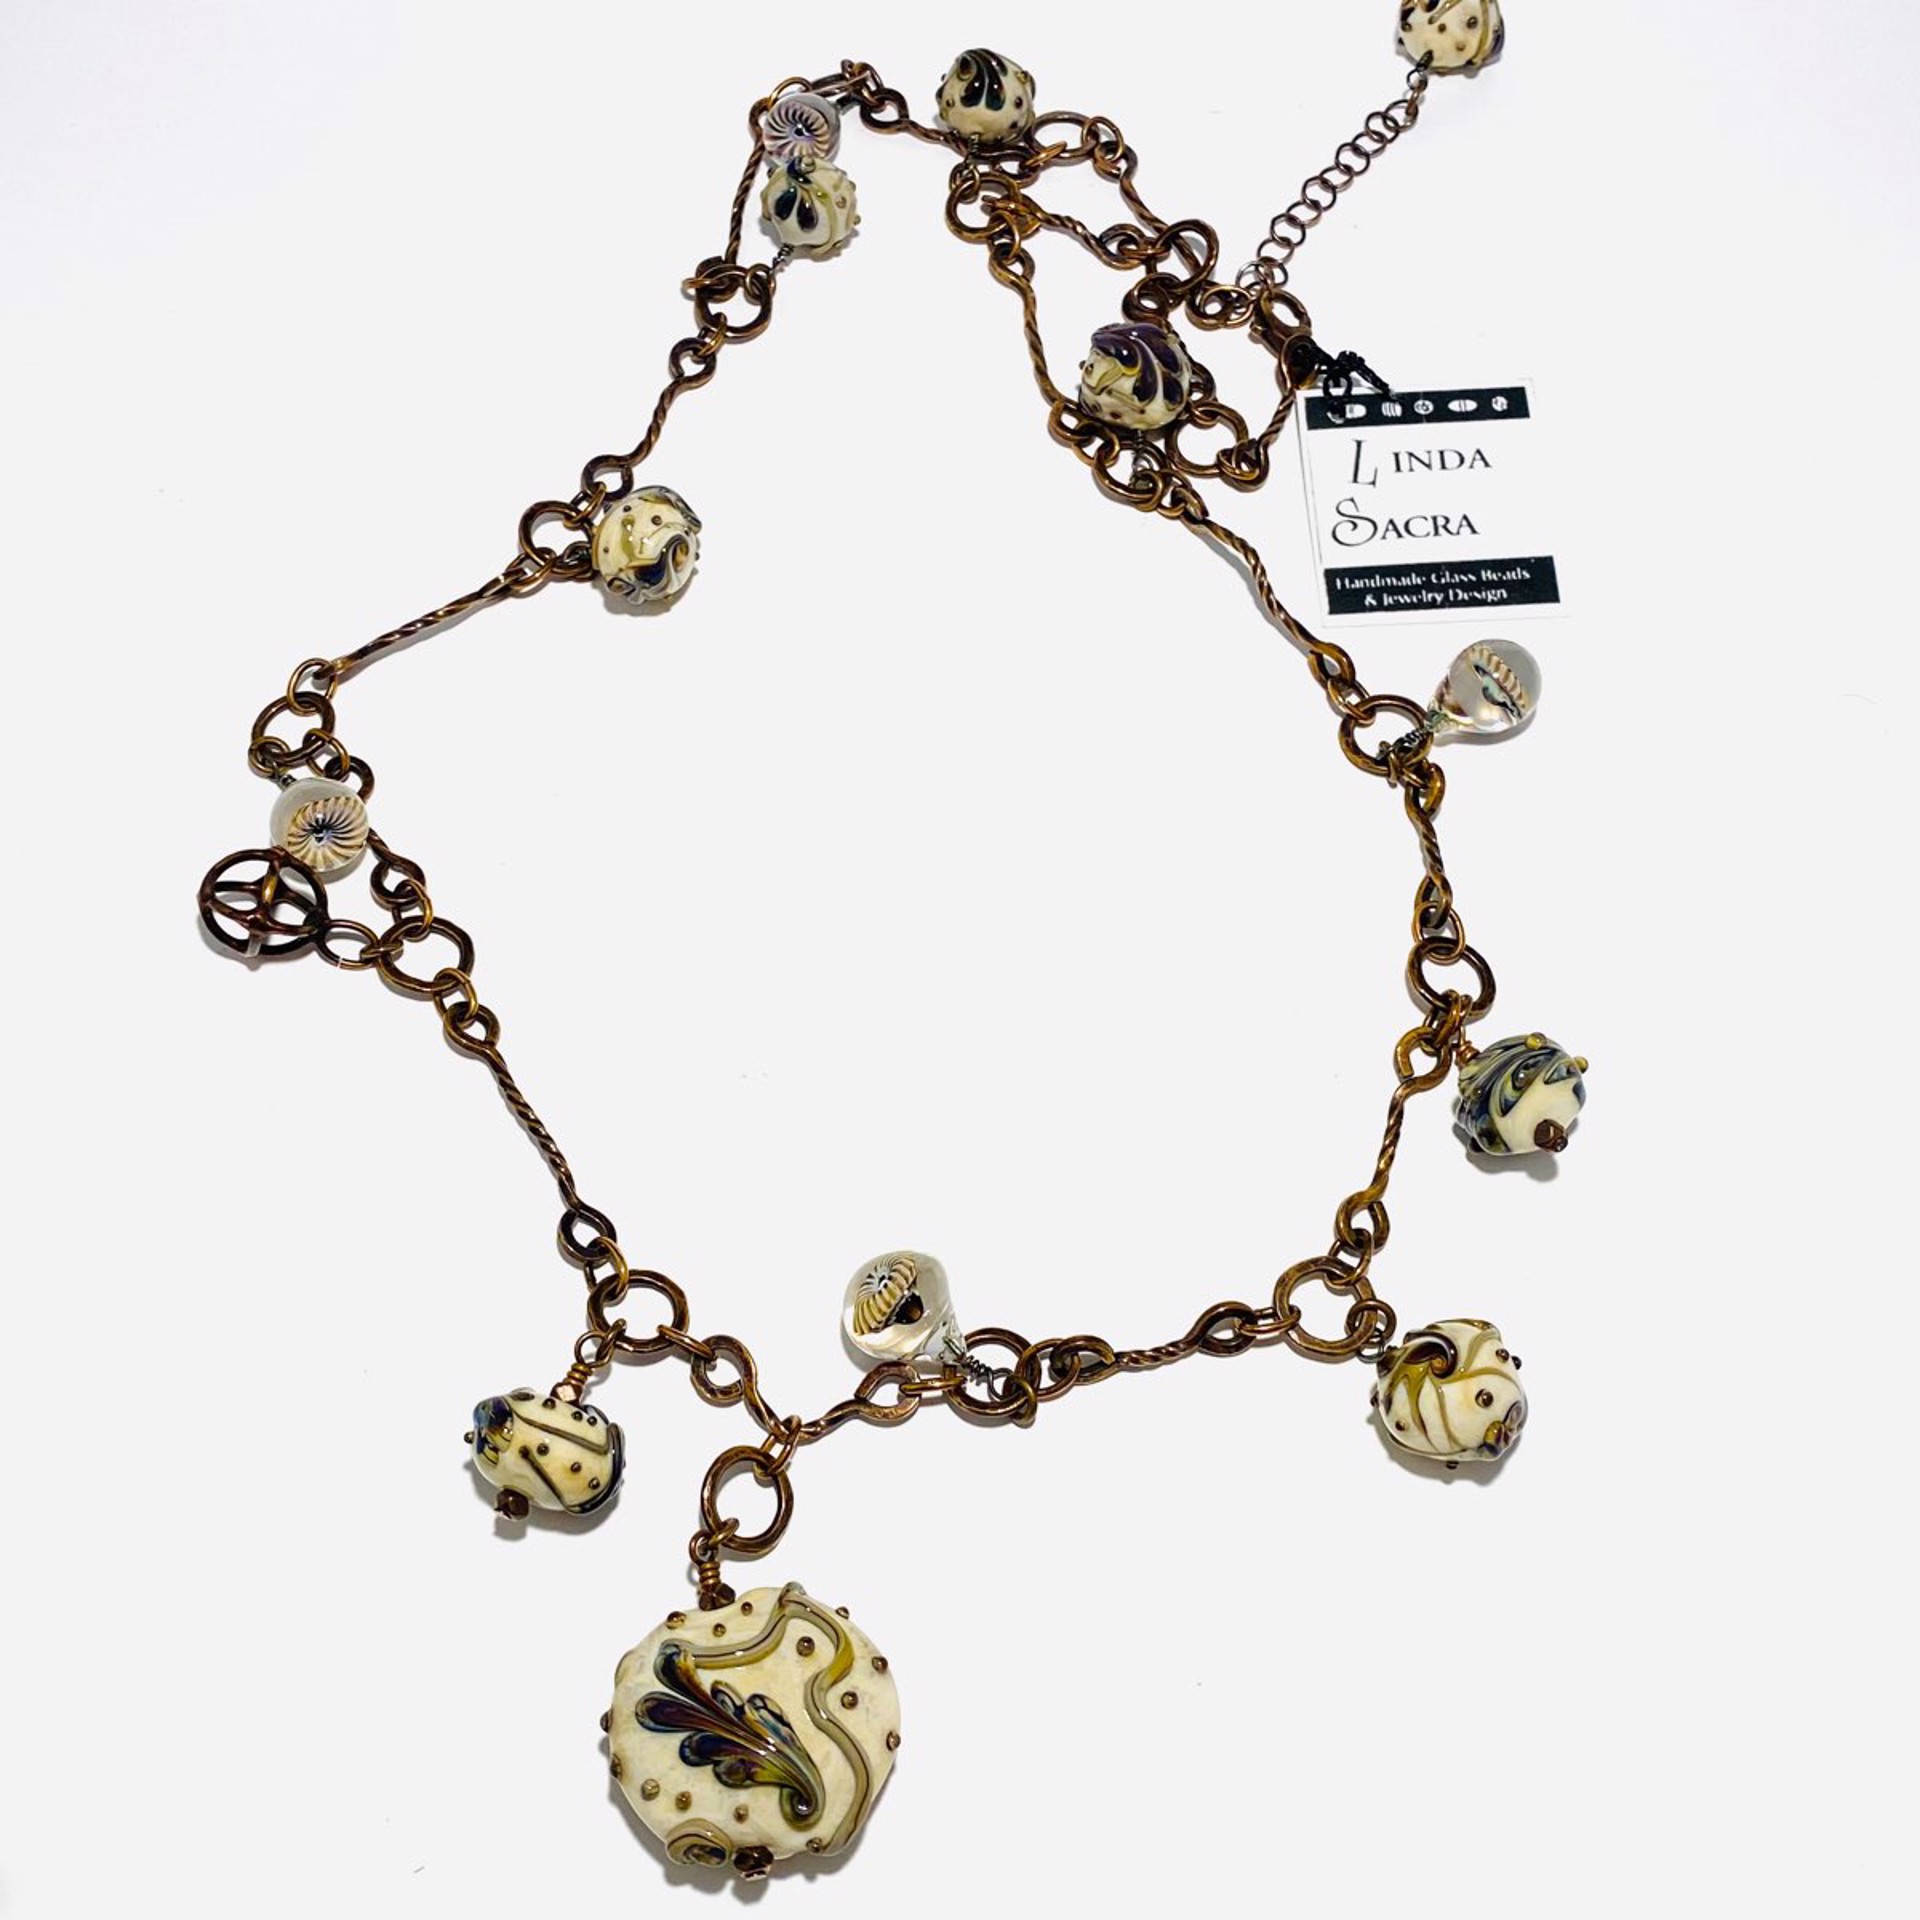 Avario Plum Murrinni Bubble Beads Handcrafted Bronze Necklace LS22-469 by Linda Sacra